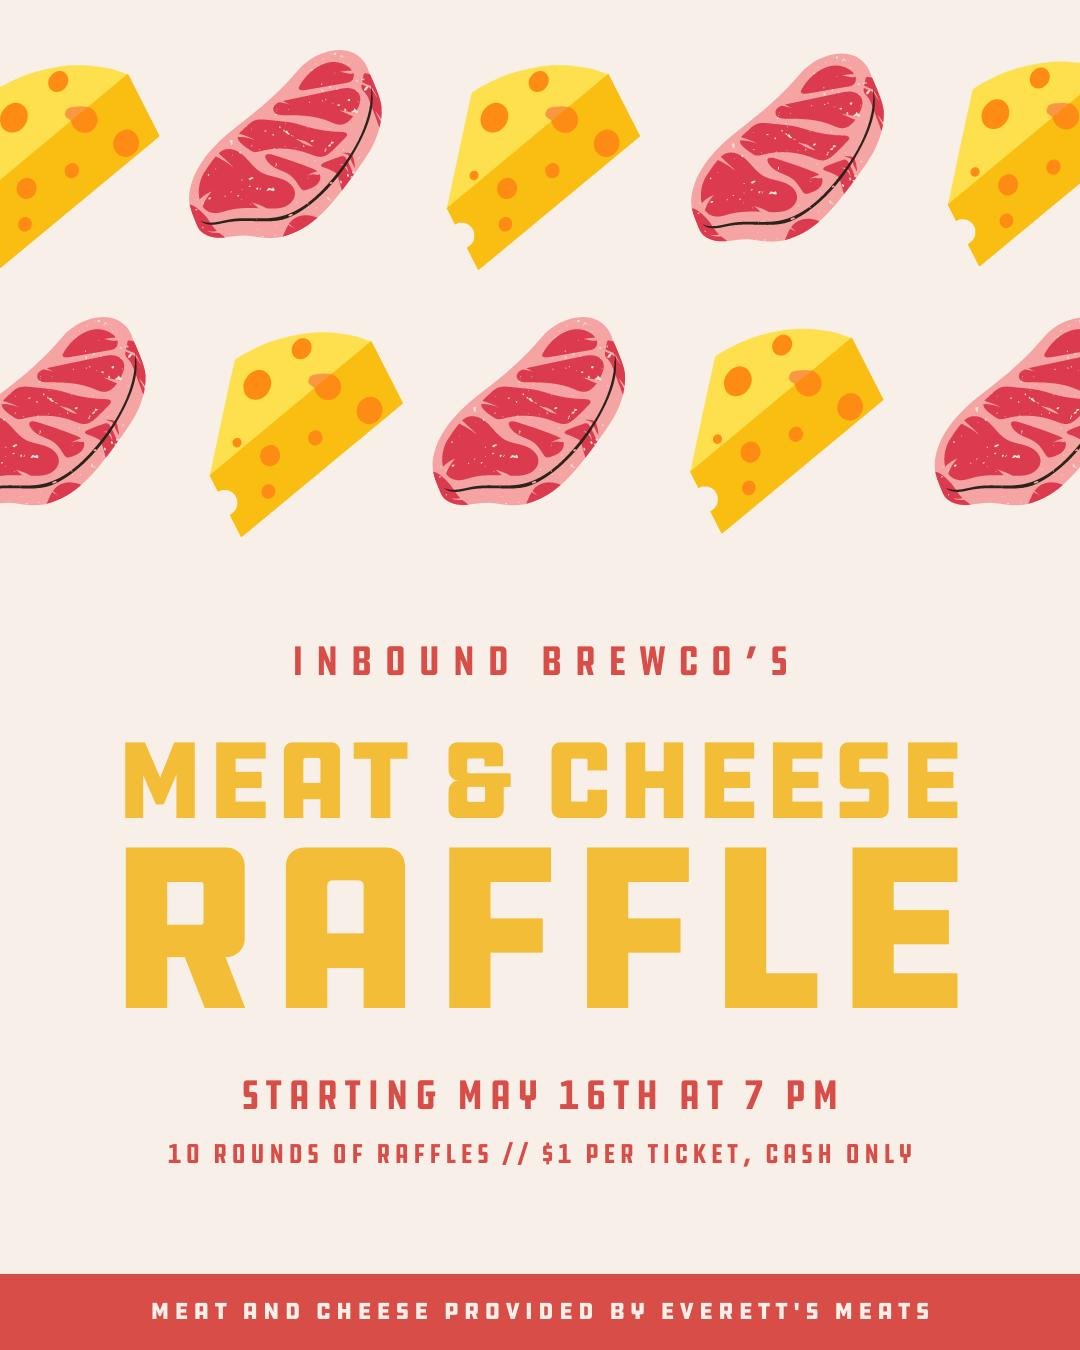 🎉🍖🧀 Get ready to indulge in a meat and cheese extravaganza at Inbound BrewCo! 🧀🍖🎉

🗓 Mark your calendars for May 16th, because we're kicking off our Meat &amp; Cheese Raffle night! From now on, it's a monthly affair every third Thursday!

🕖 S